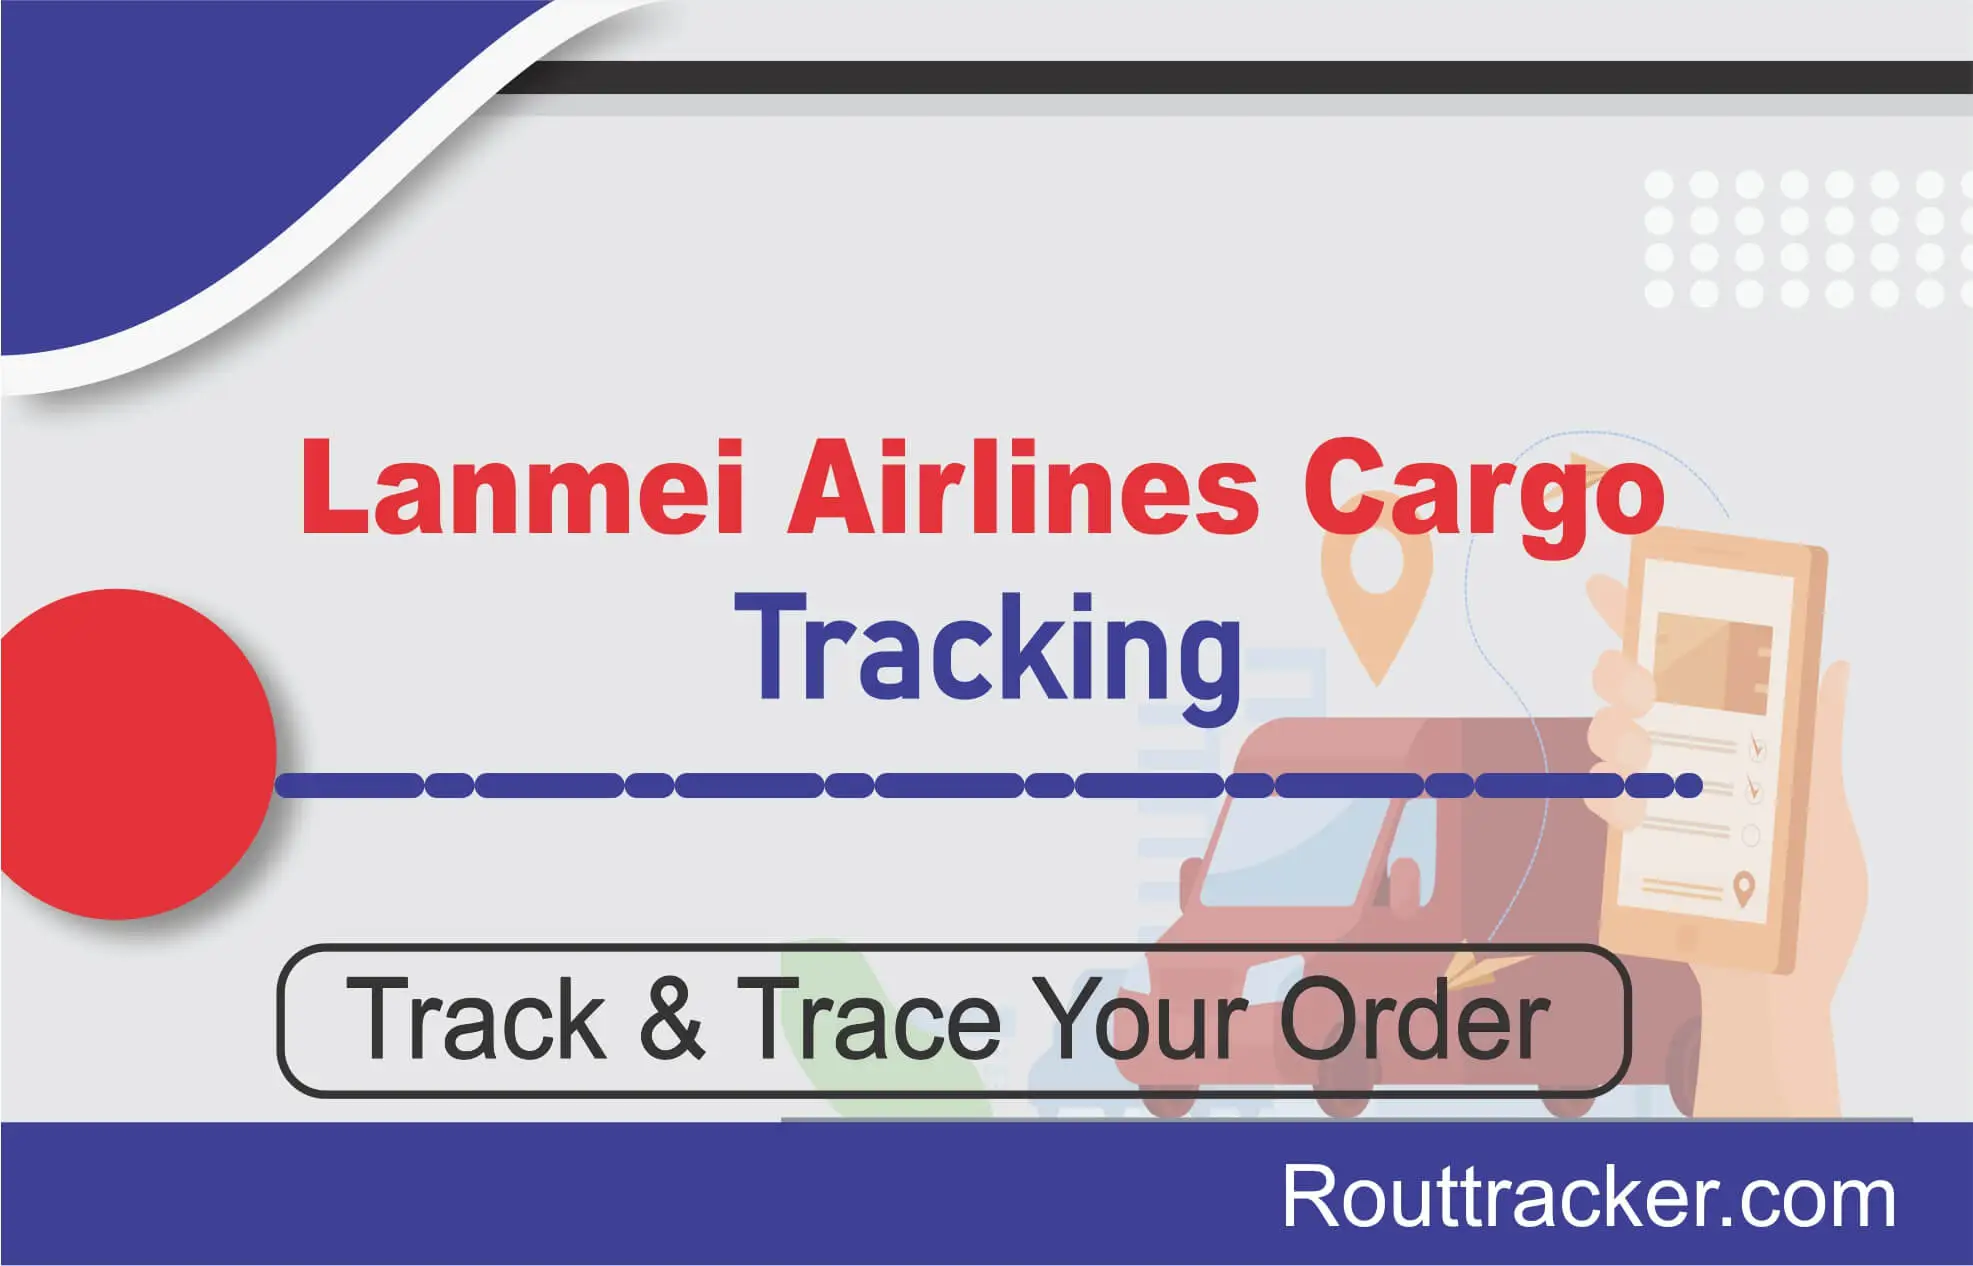 Lanmei Airlines Cargo Tracking